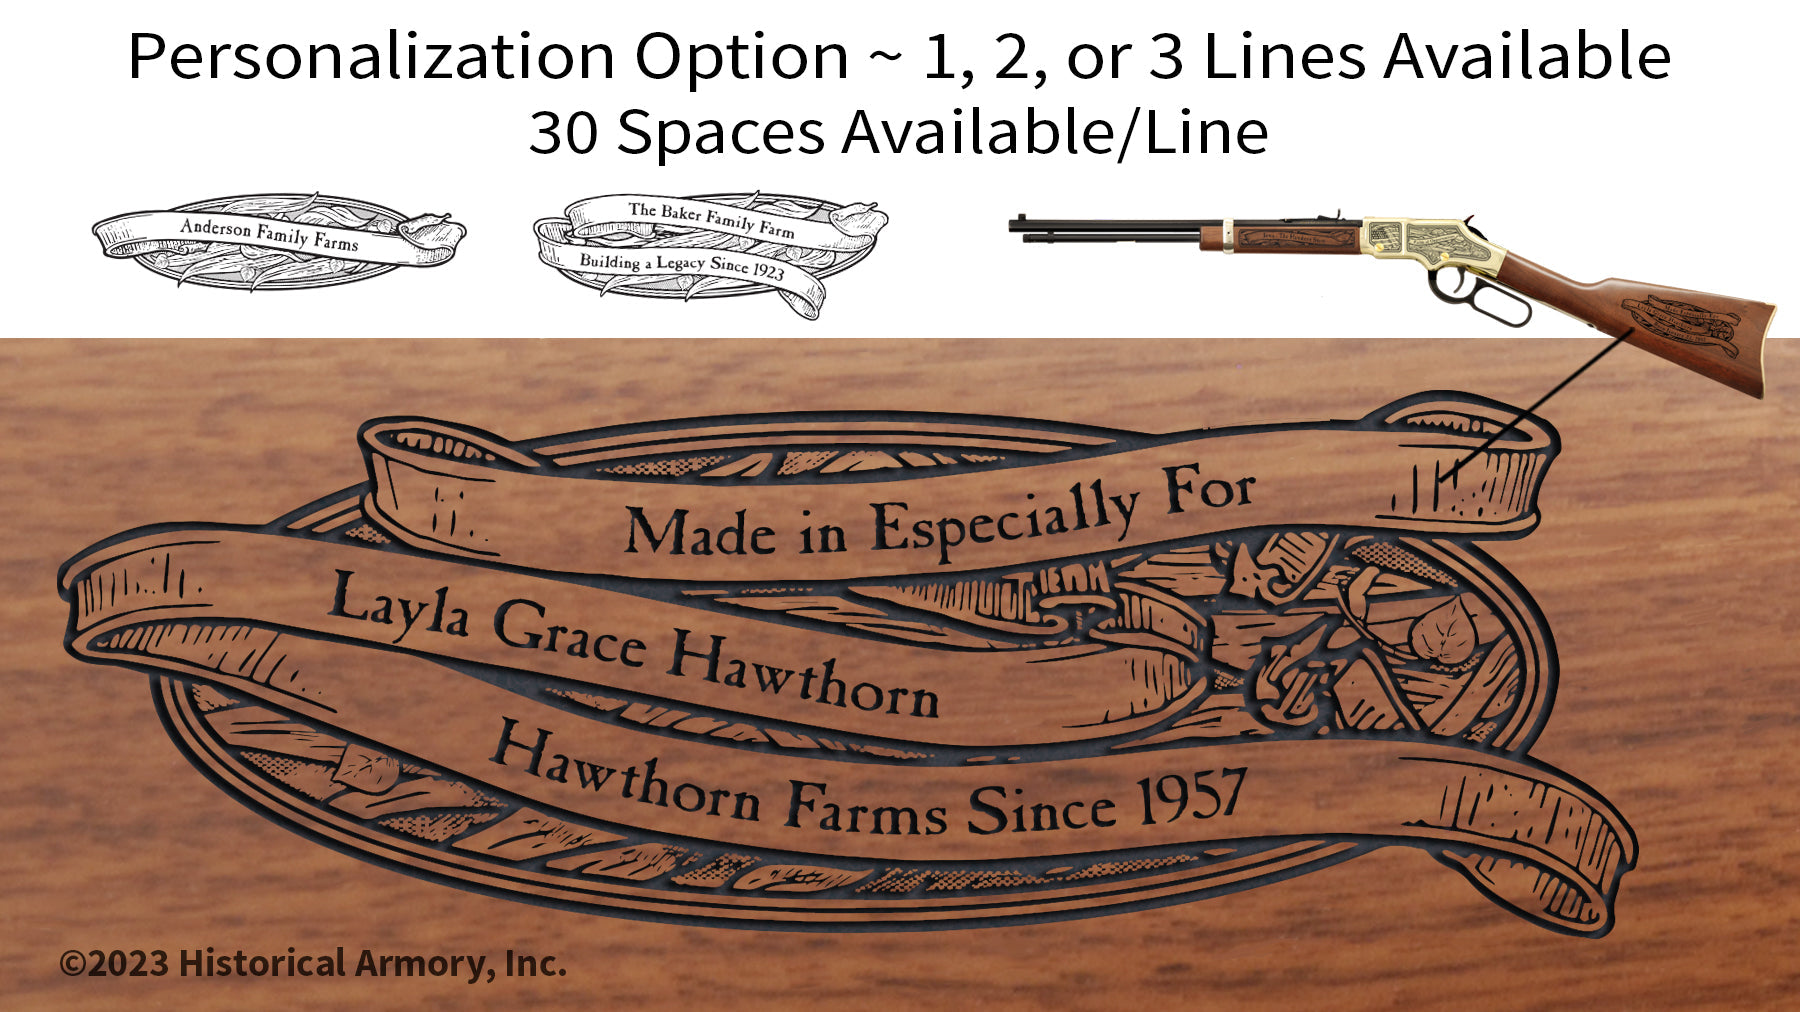 Alabama Agricultural Heritage Engraved Rifle Personalization